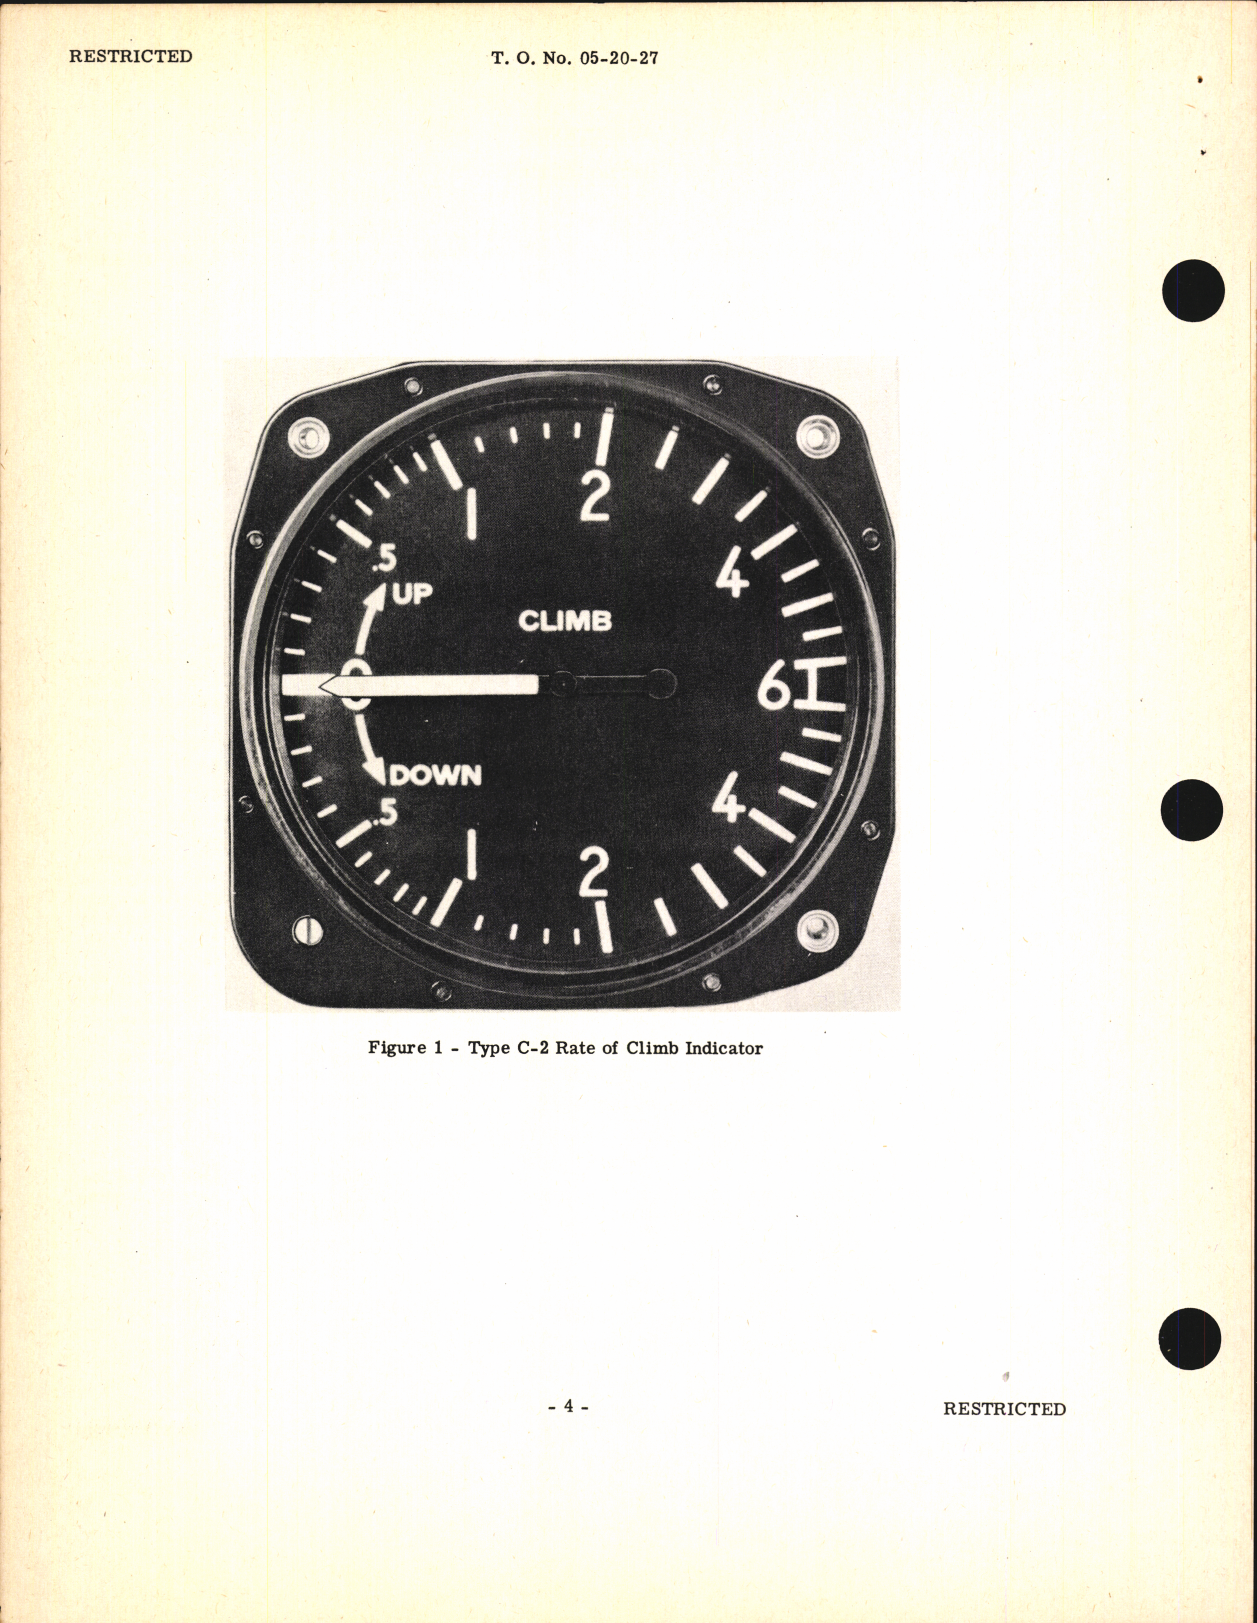 Sample page 6 from AirCorps Library document: Handbook of Instructions with Parts Catalog for Type C-2 Rate of Climb Indicator